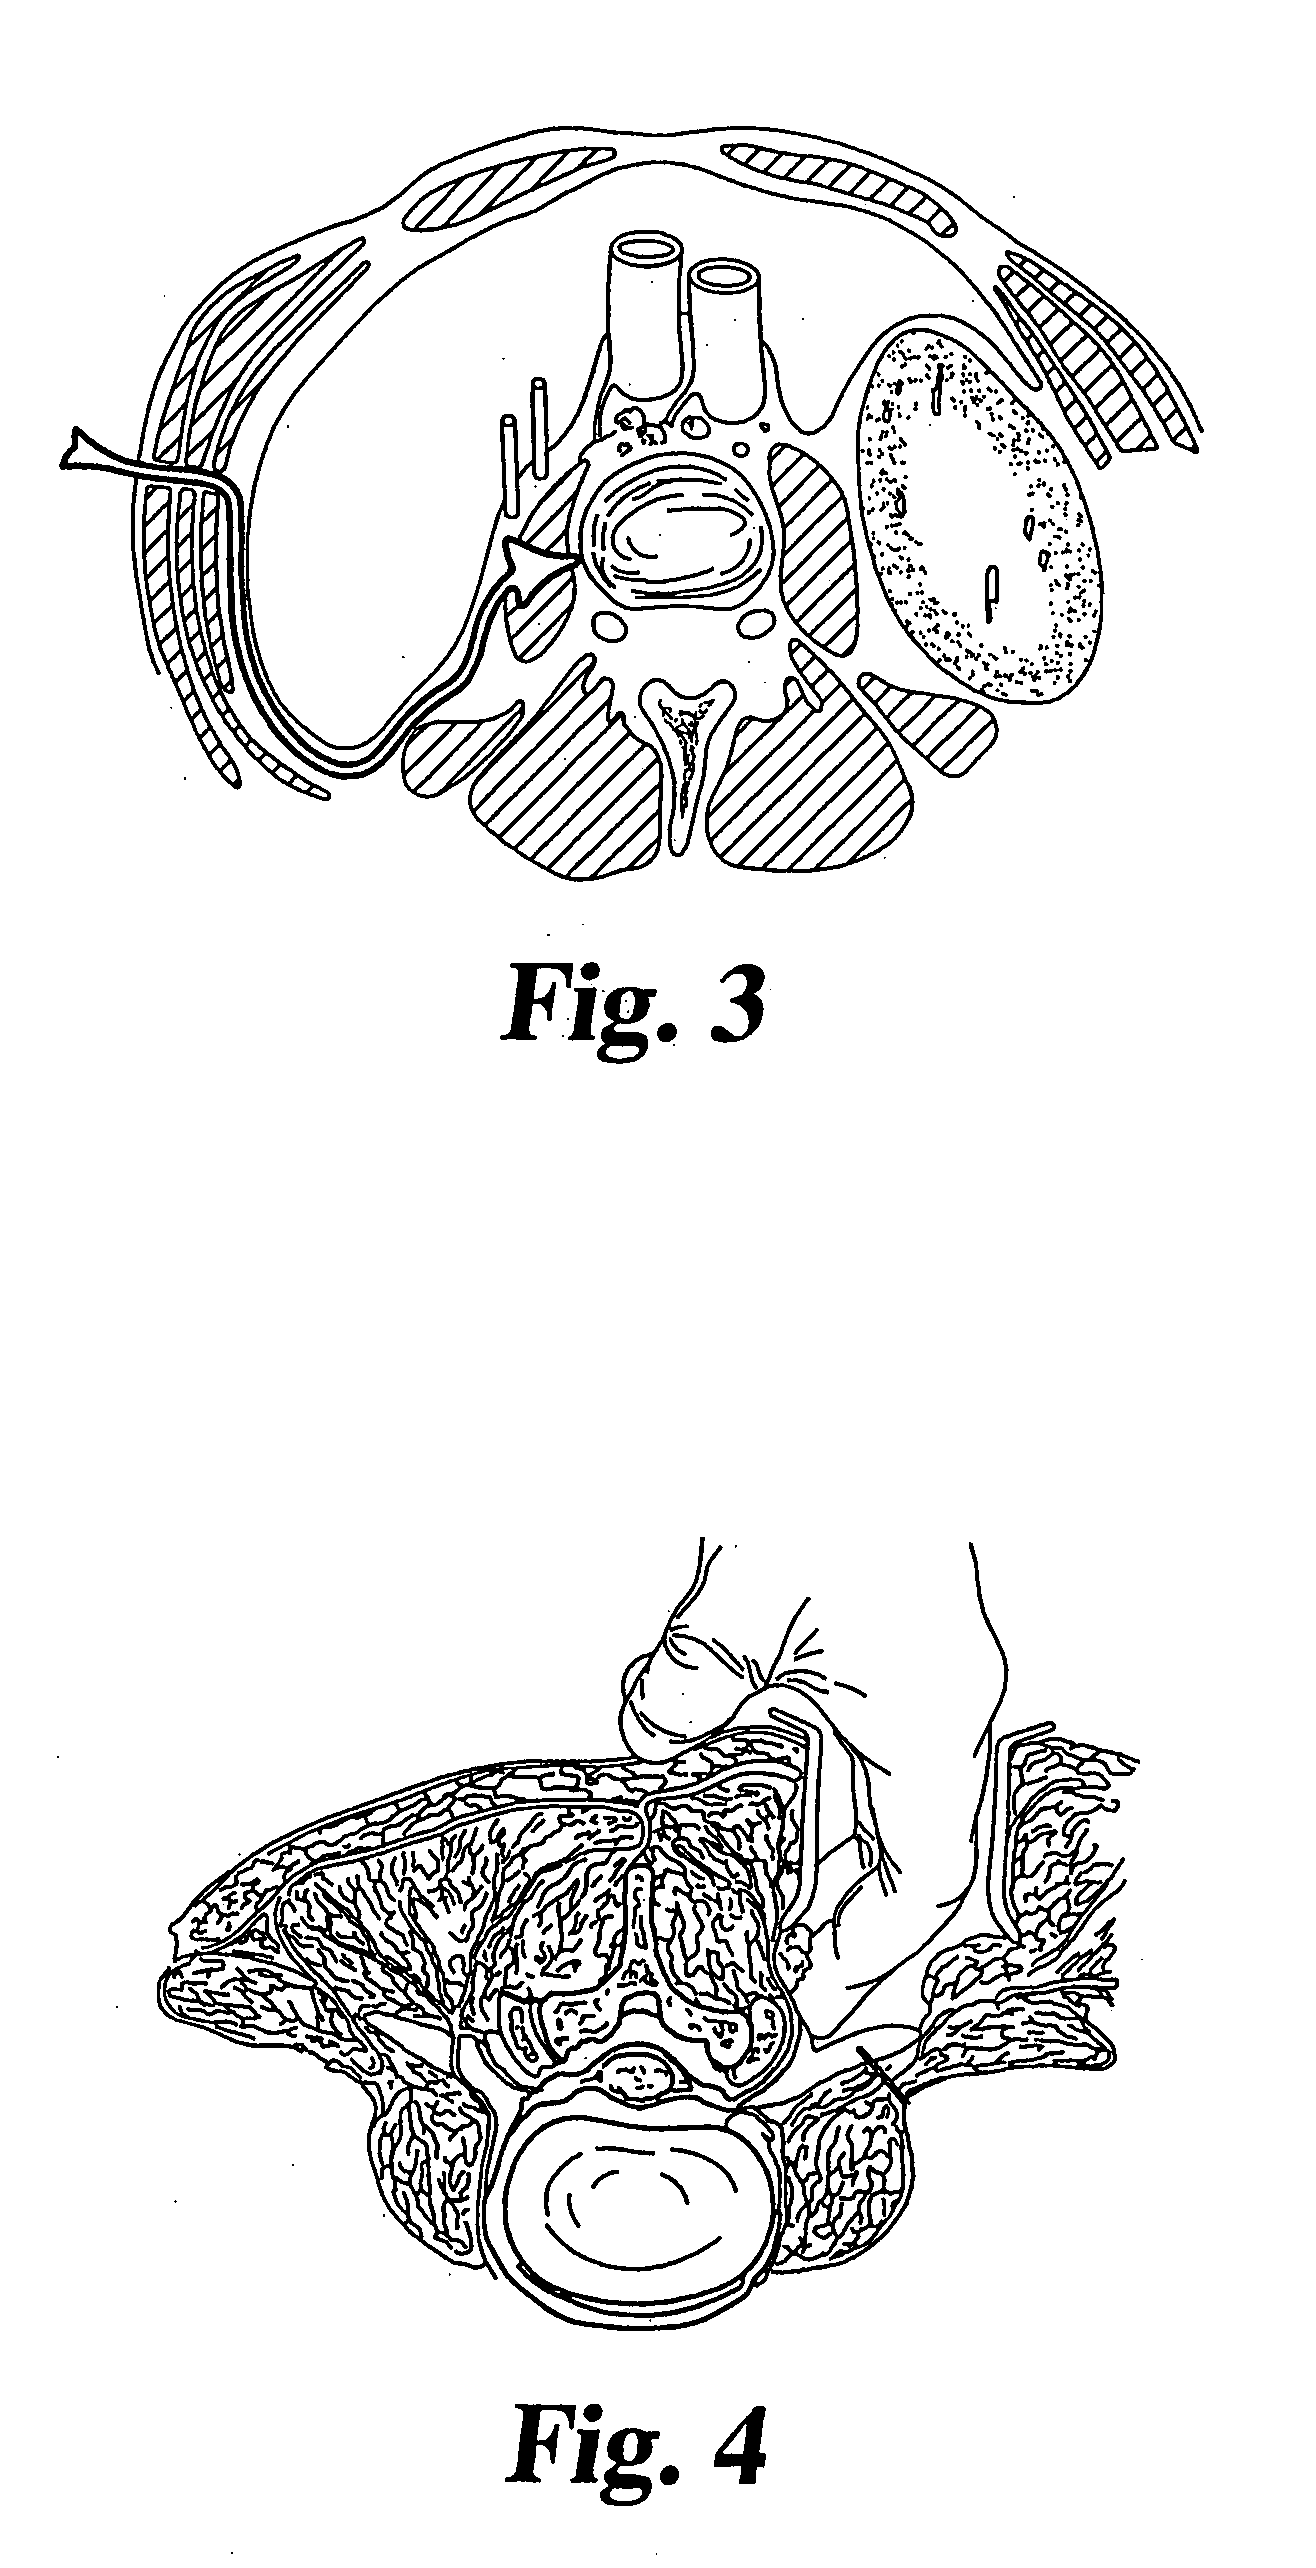 Devices for injecting a curable biomaterial into a intervertebral space